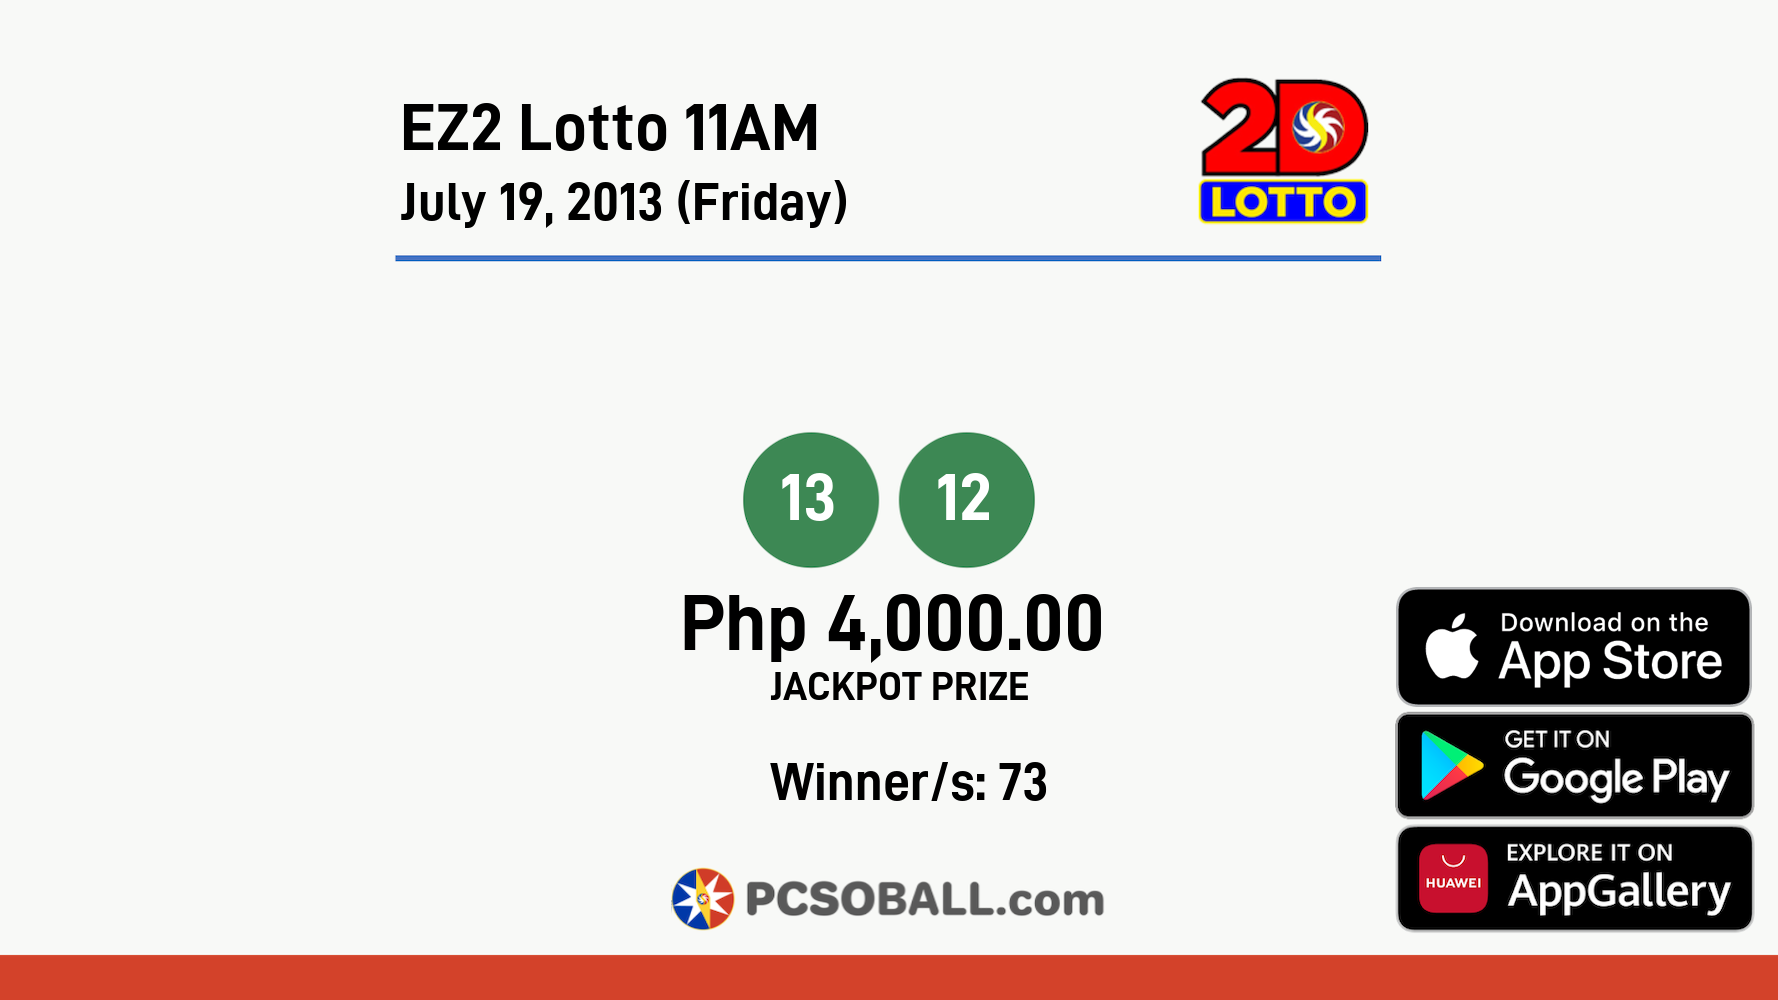 EZ2 Lotto 11AM July 19, 2013 (Friday) Result